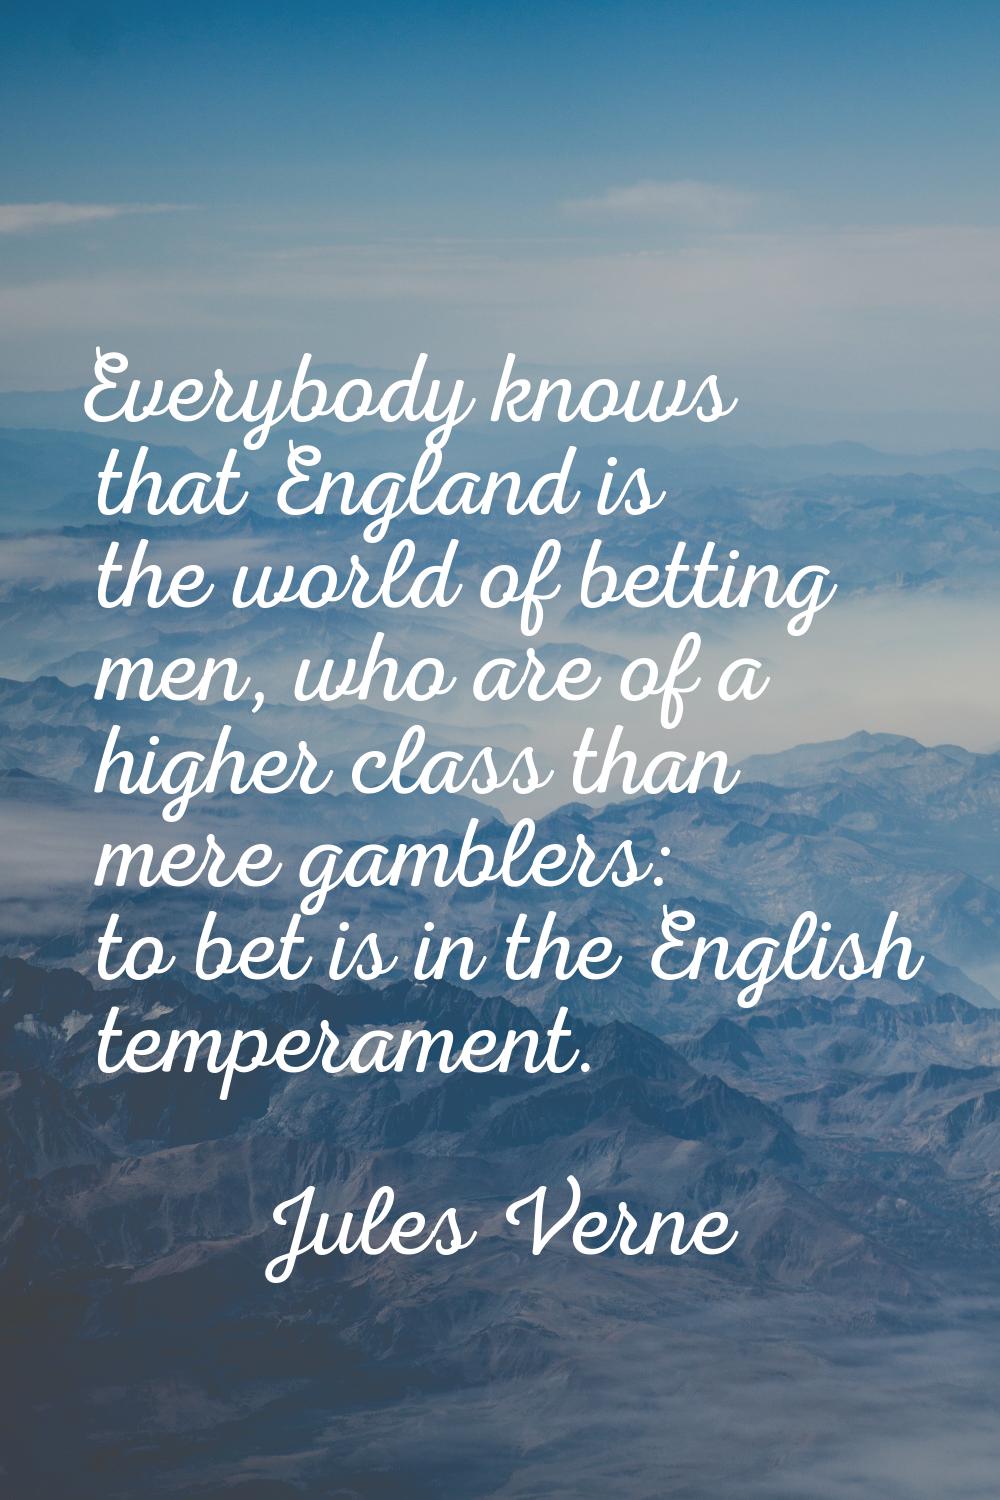 Everybody knows that England is the world of betting men, who are of a higher class than mere gambl